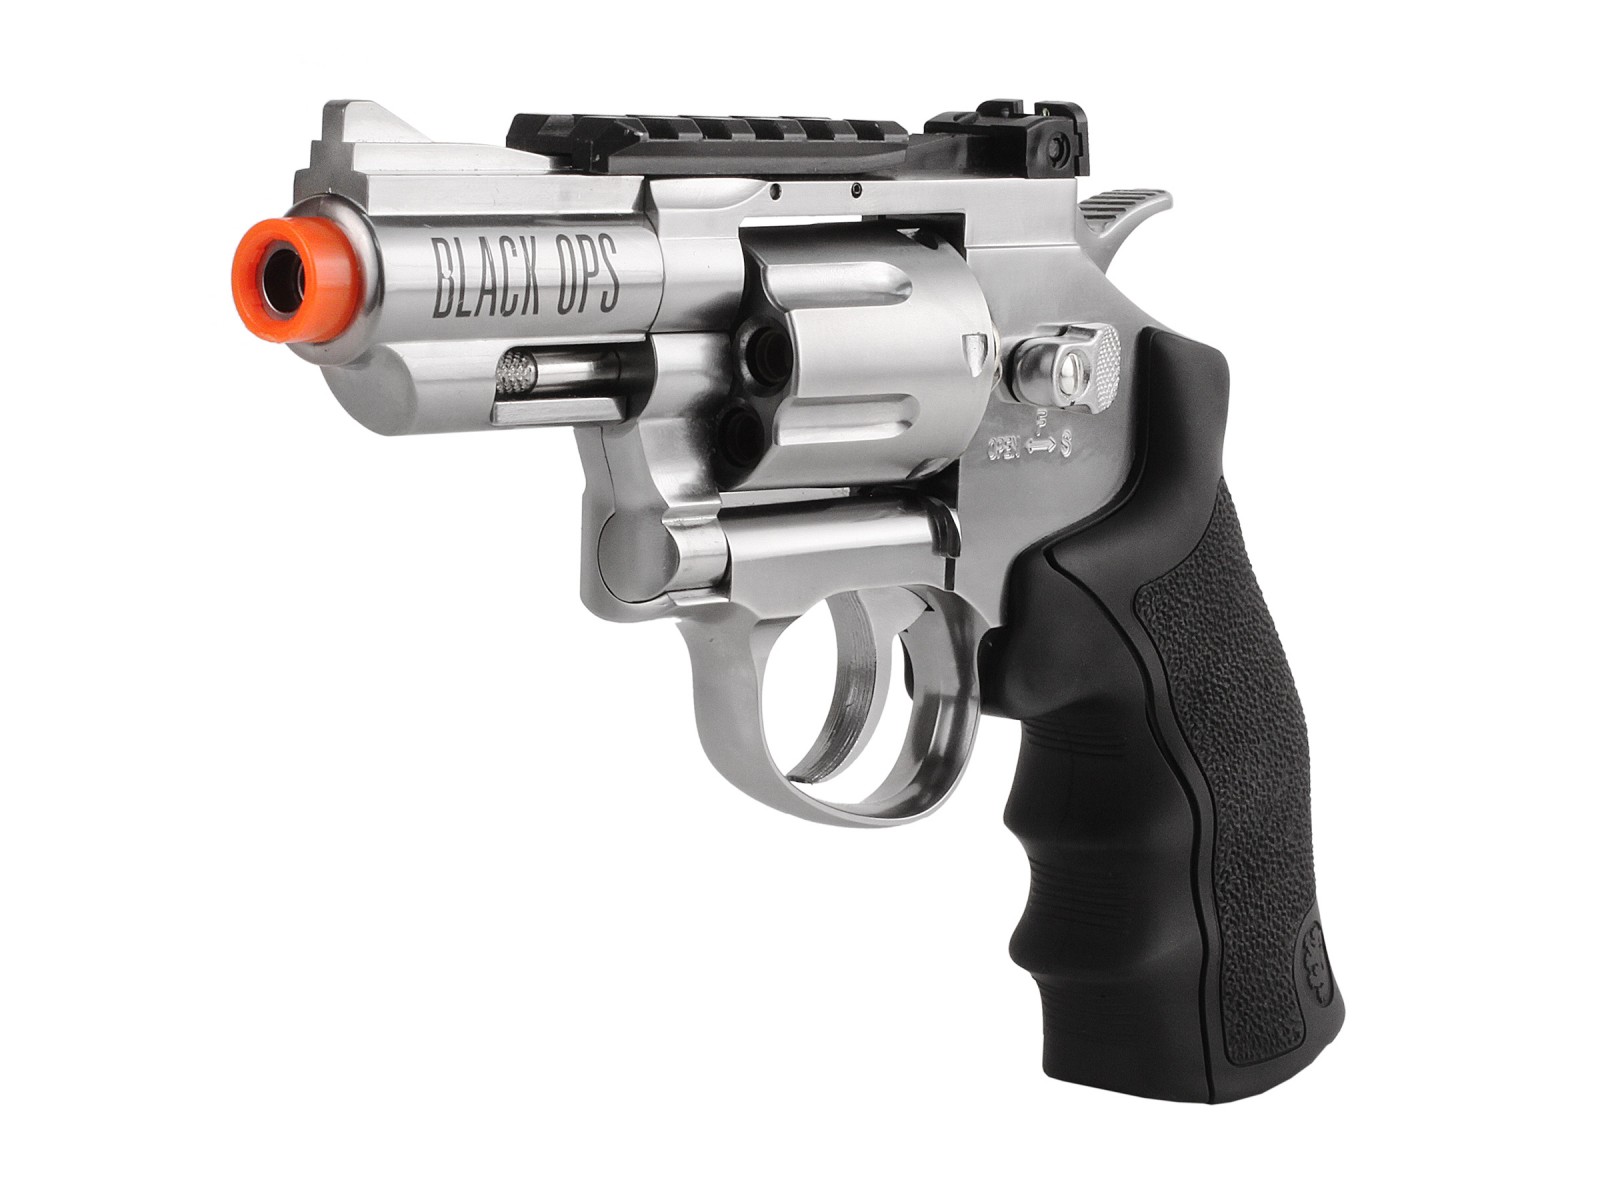 Black Ops / WG CO2 Airsoft Revolver, Silver, 2.5"